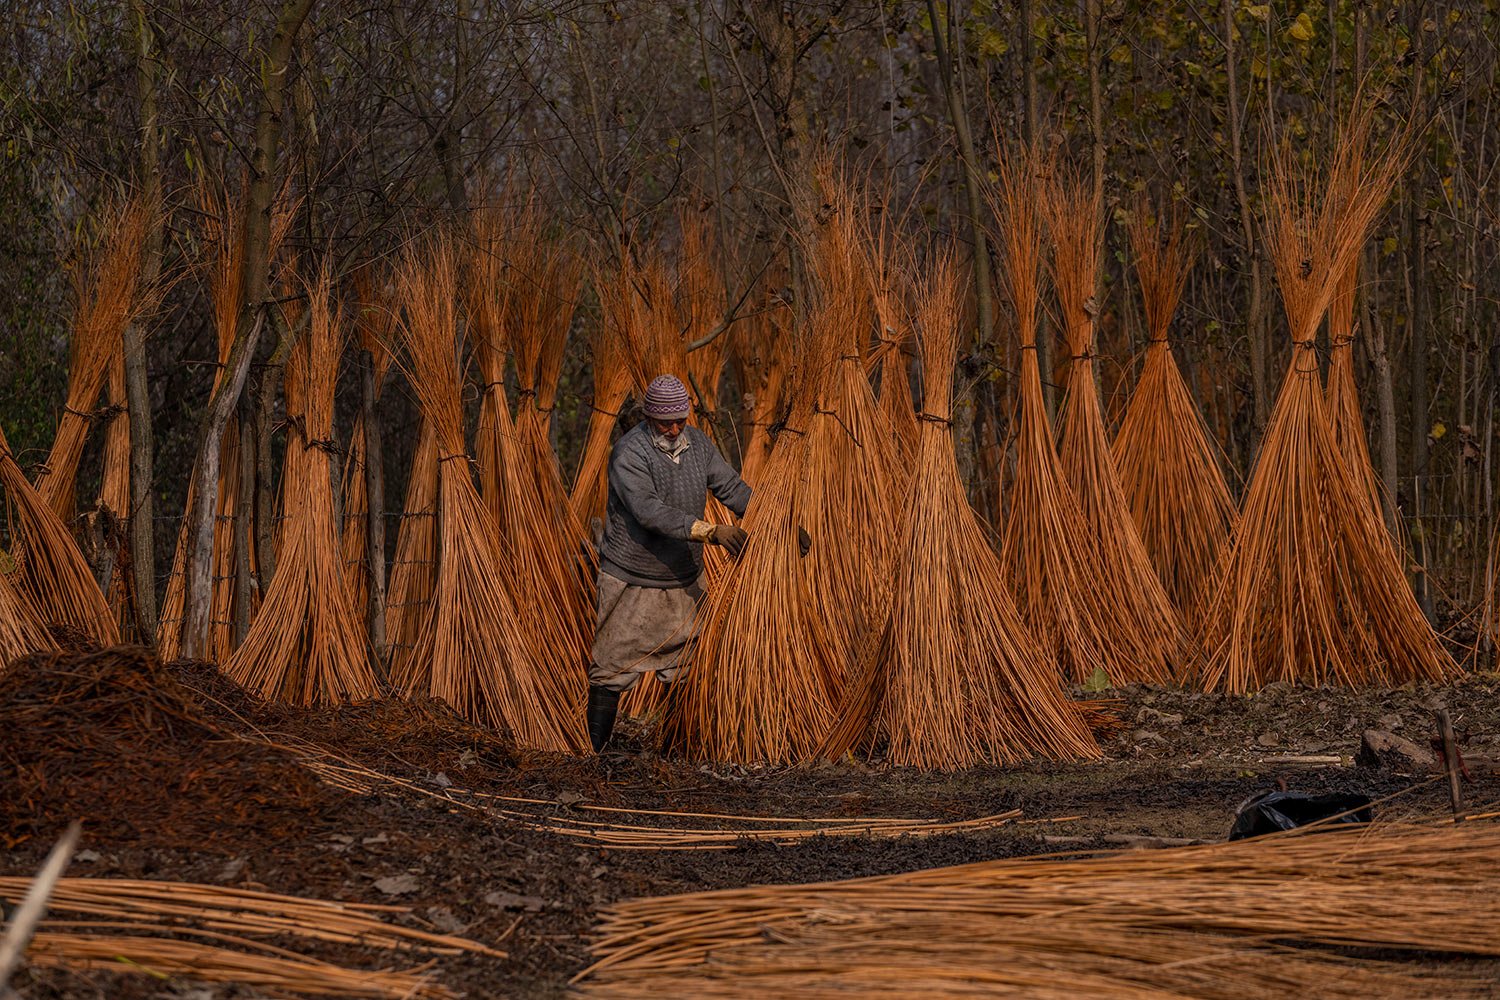  A Kashmiri villager inspects wicker sticks left for drying after peeling the cover on the outskirts of Srinagar, Indian controlled Kashmir, Thursday, Nov. 16, 2023.  (AP Photo/Dar Yasin) 